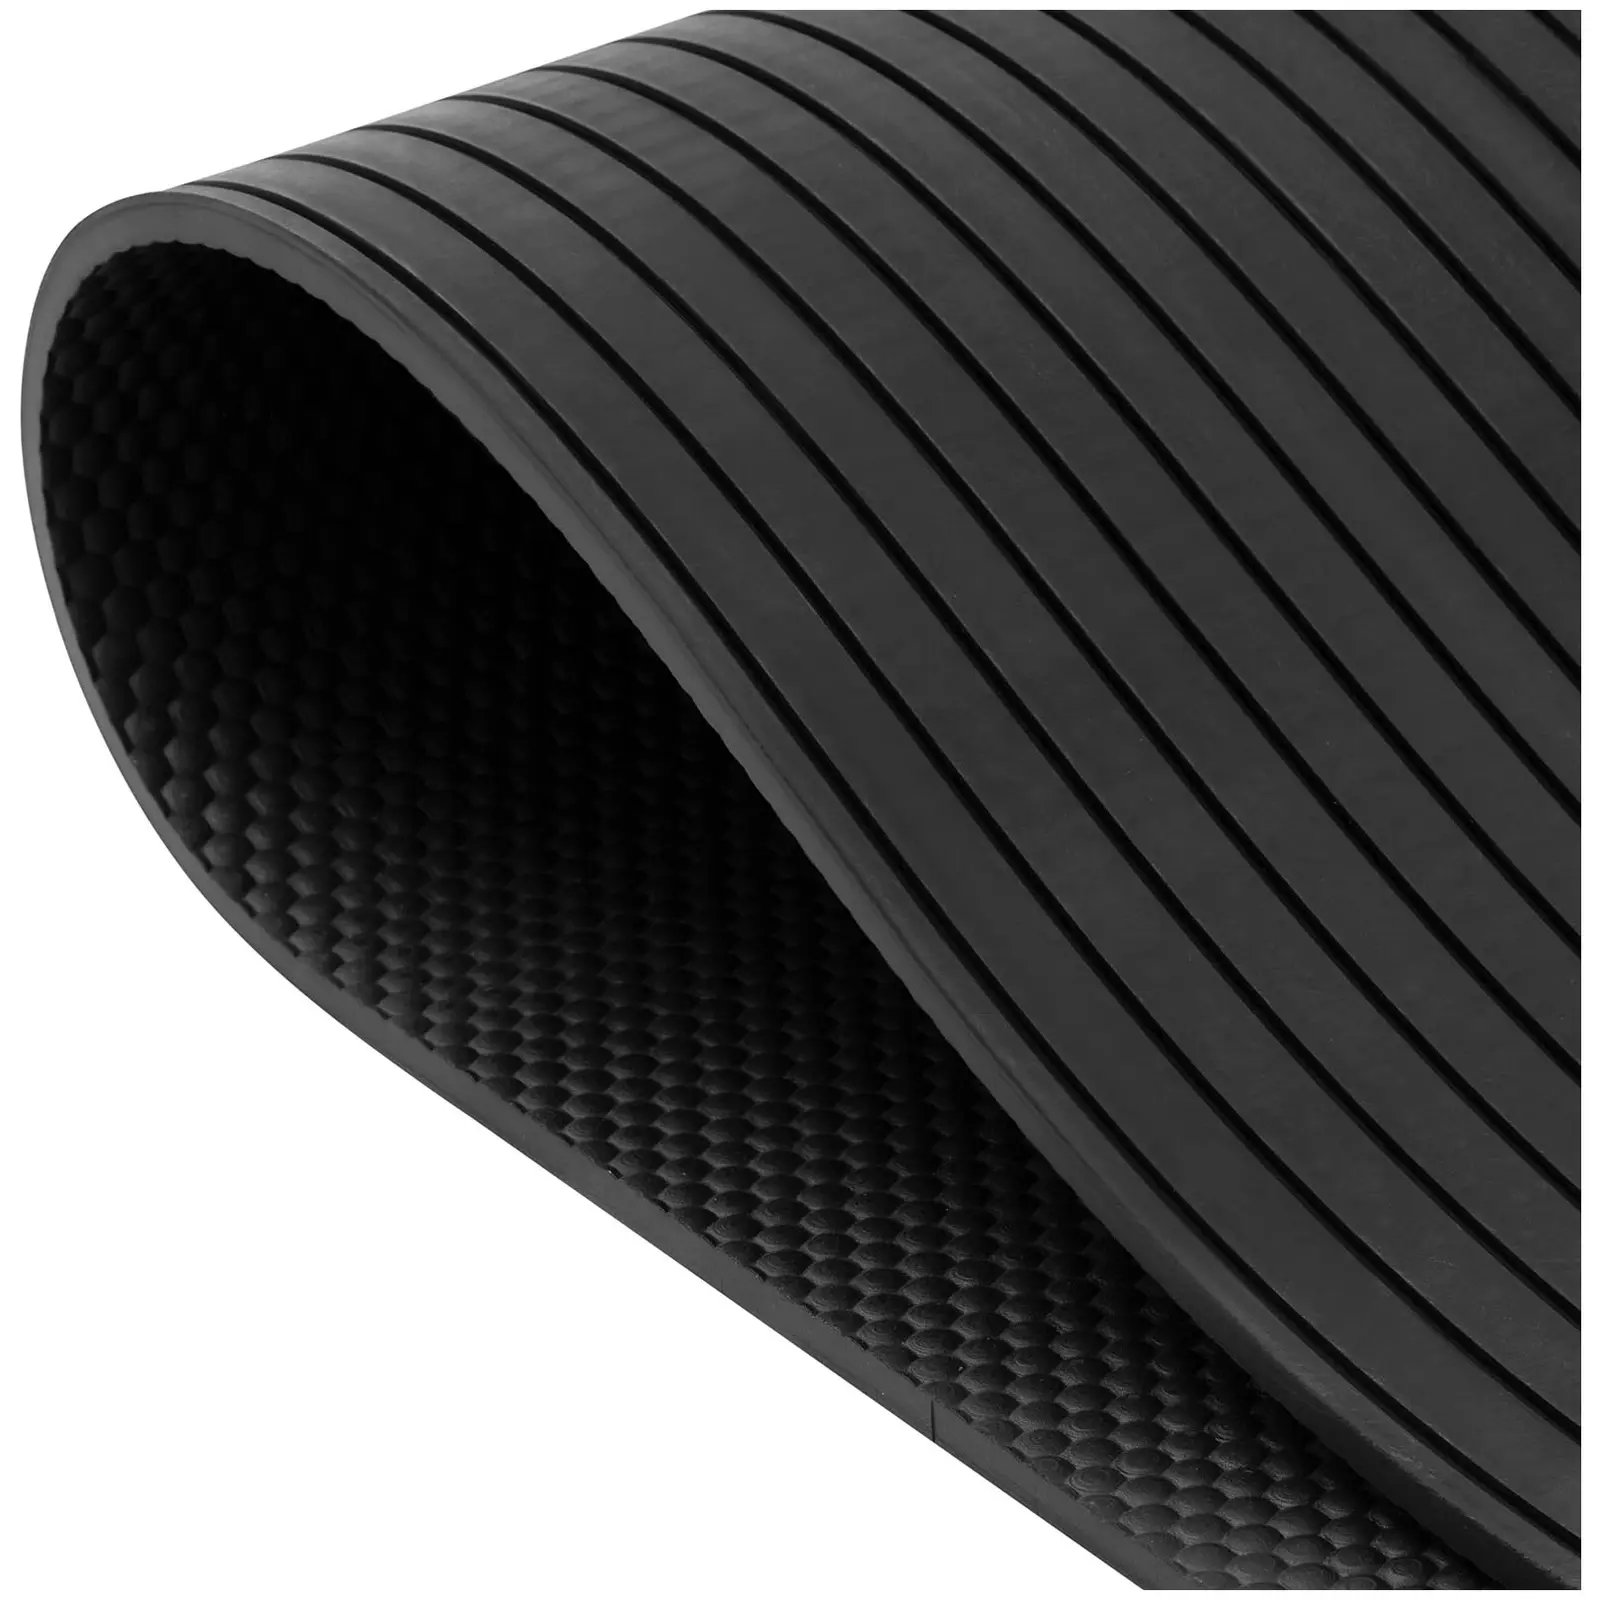 Stall Mat - with drainage grooves - 1830 x 1220 x 13 mm - NR, Recycled Rubber